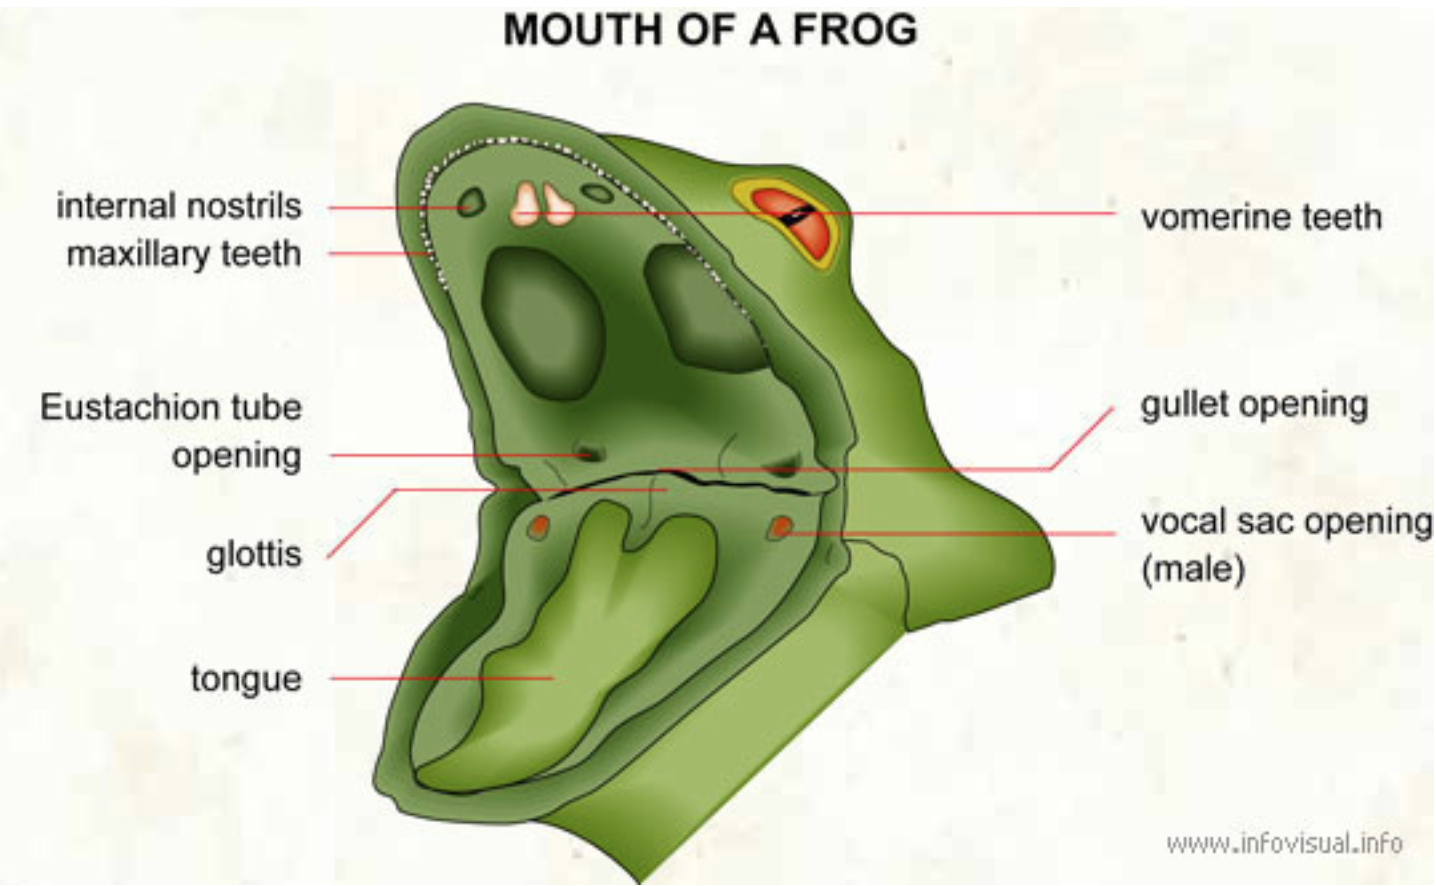 What is a Frog?, Frog Facts for Kids